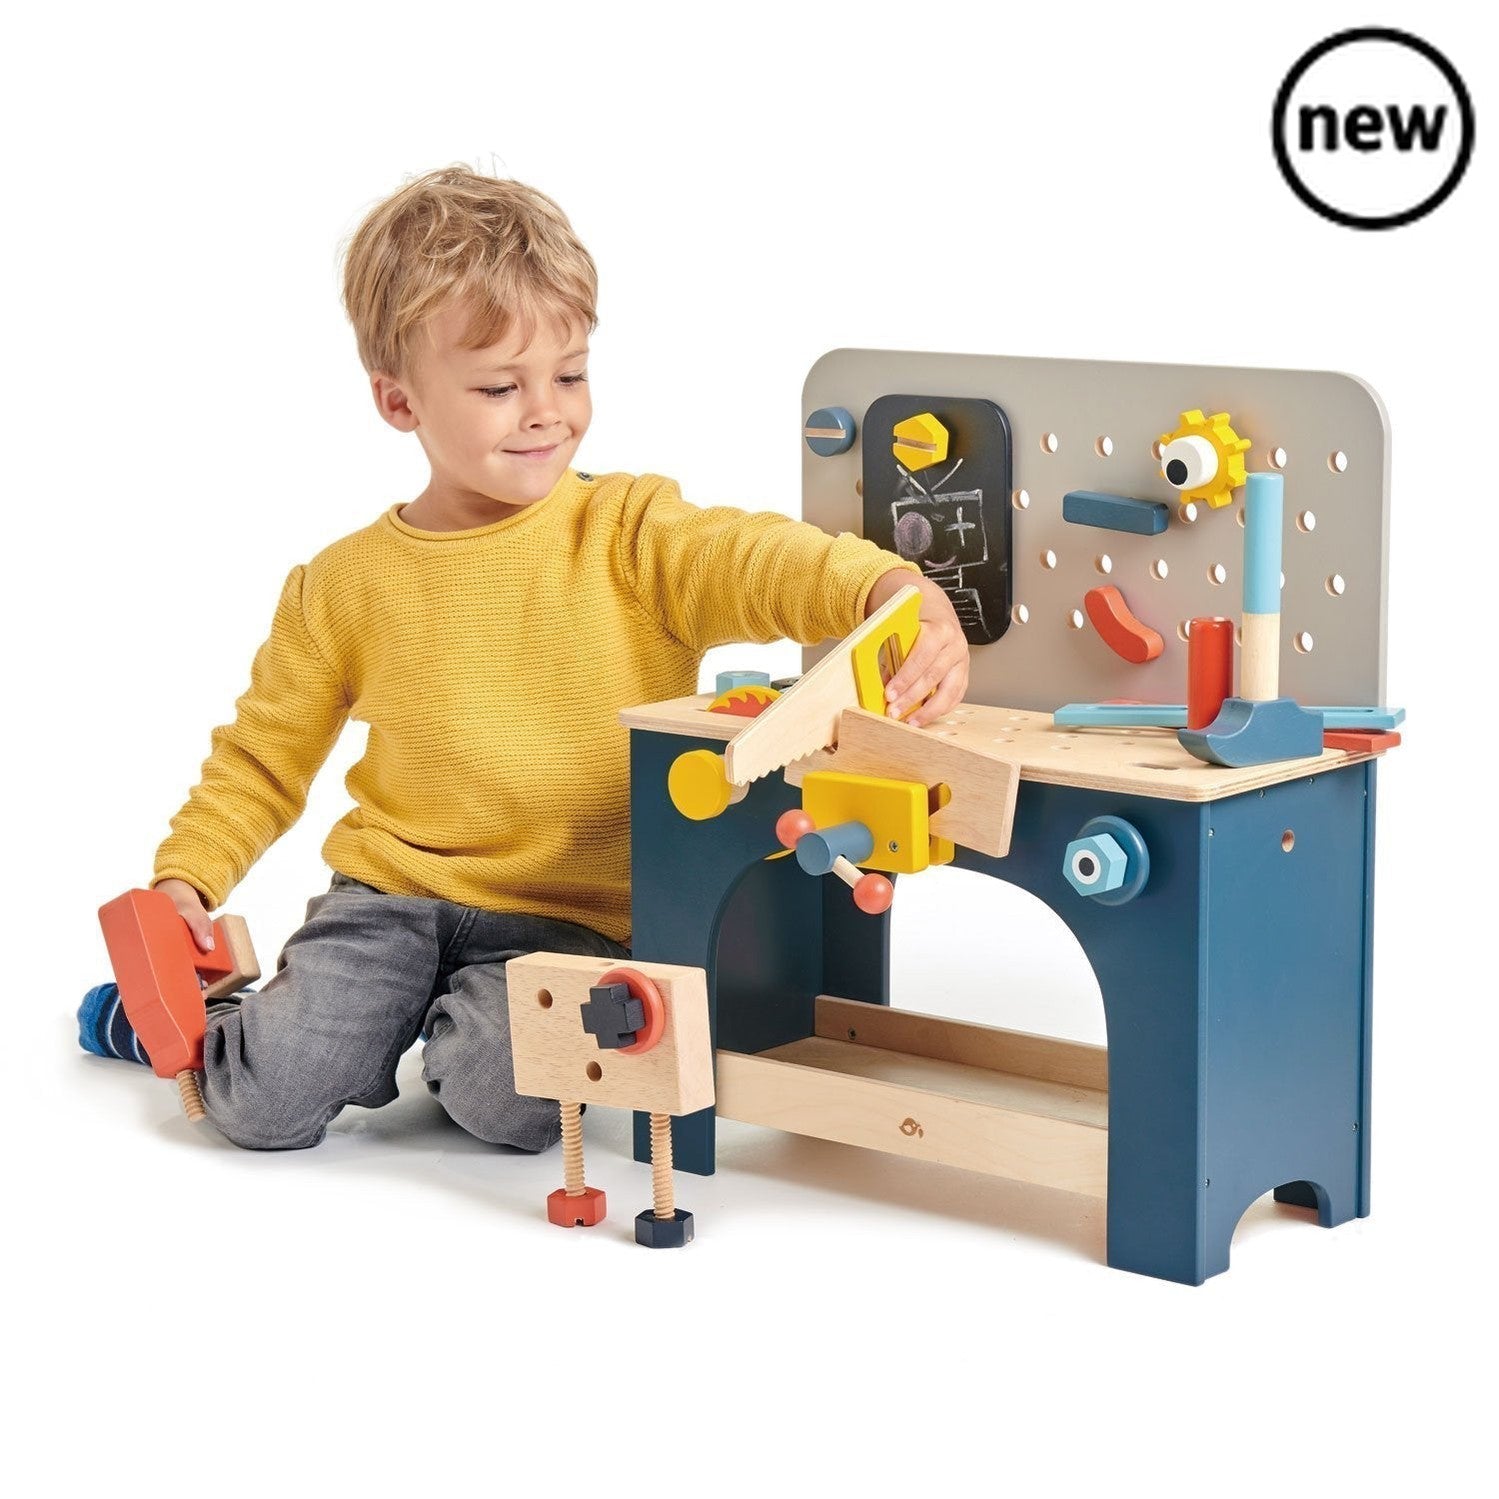 Tenderleaf Toys Wooden Table Top Tool Bench, Now you little ones can help around the house, such fun! Watch them make their own toys safely with this beautifully crafted Tender Leaf Toys Table Top Tool Bench. A great addition to any little budding carpenter's playroom. Tools included are a Hammer, Screwdriver, spanner, saw and handy red drill! Great for role play and creative play! Product size: 16.54 x 10.16 x 19.29'' Suitable for ages 3+, Tenderleaf Toys Wooden Table Top Tool Bench,Wooden Toys,Tenderleaf,